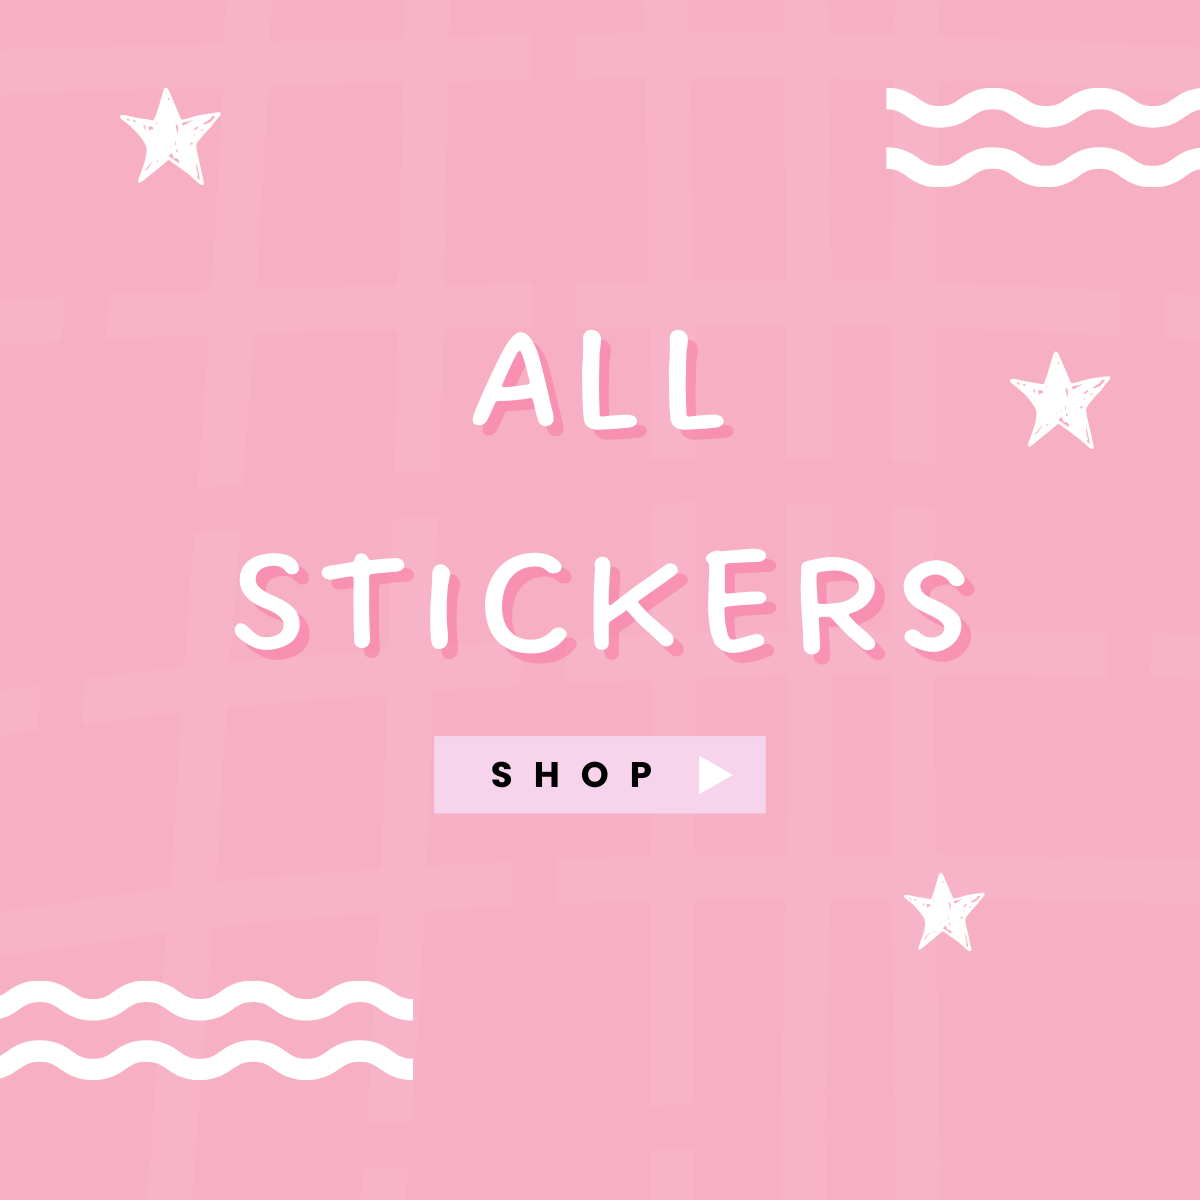 All stickers